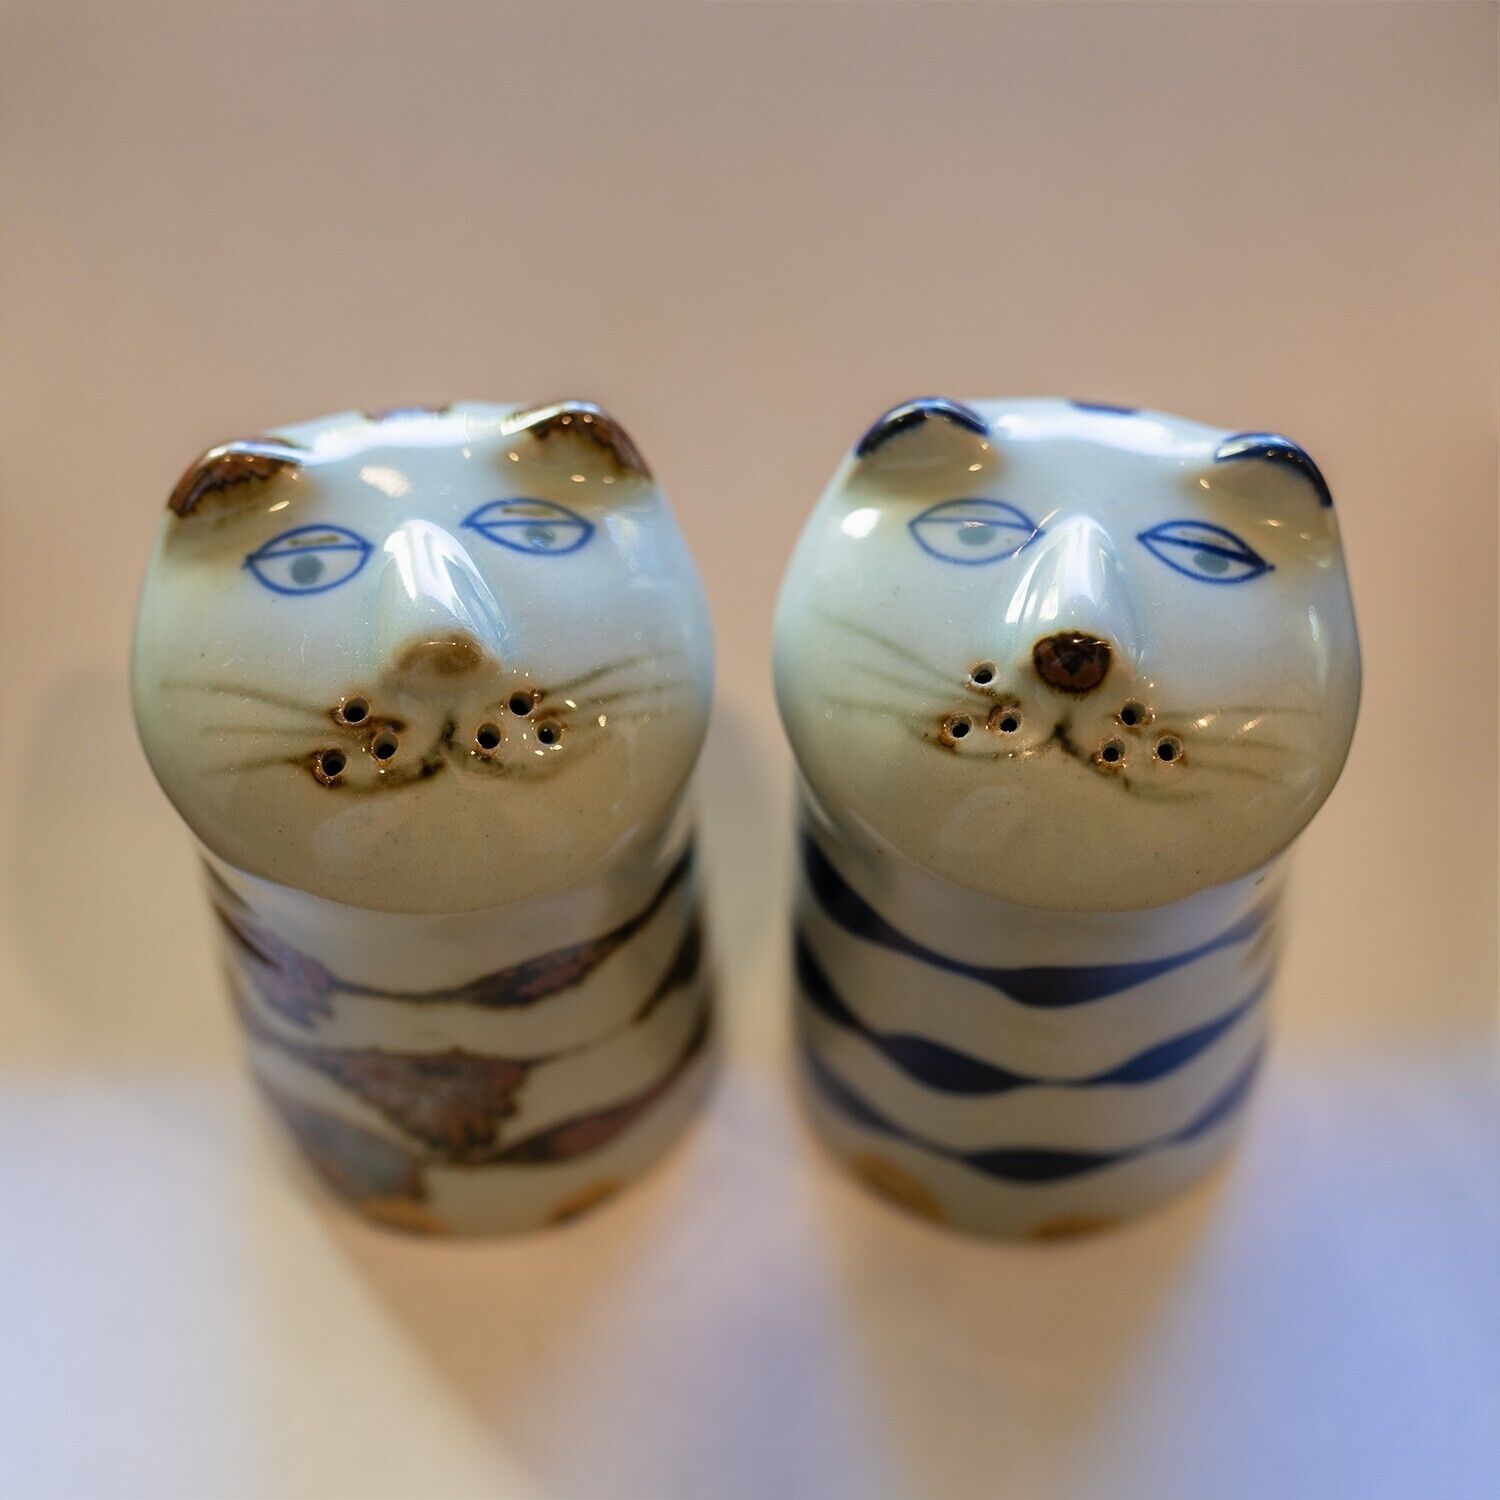 Handcrafted Blue Striped Cat Kitten Salt and Pepper Shakers - Artistic Tableware